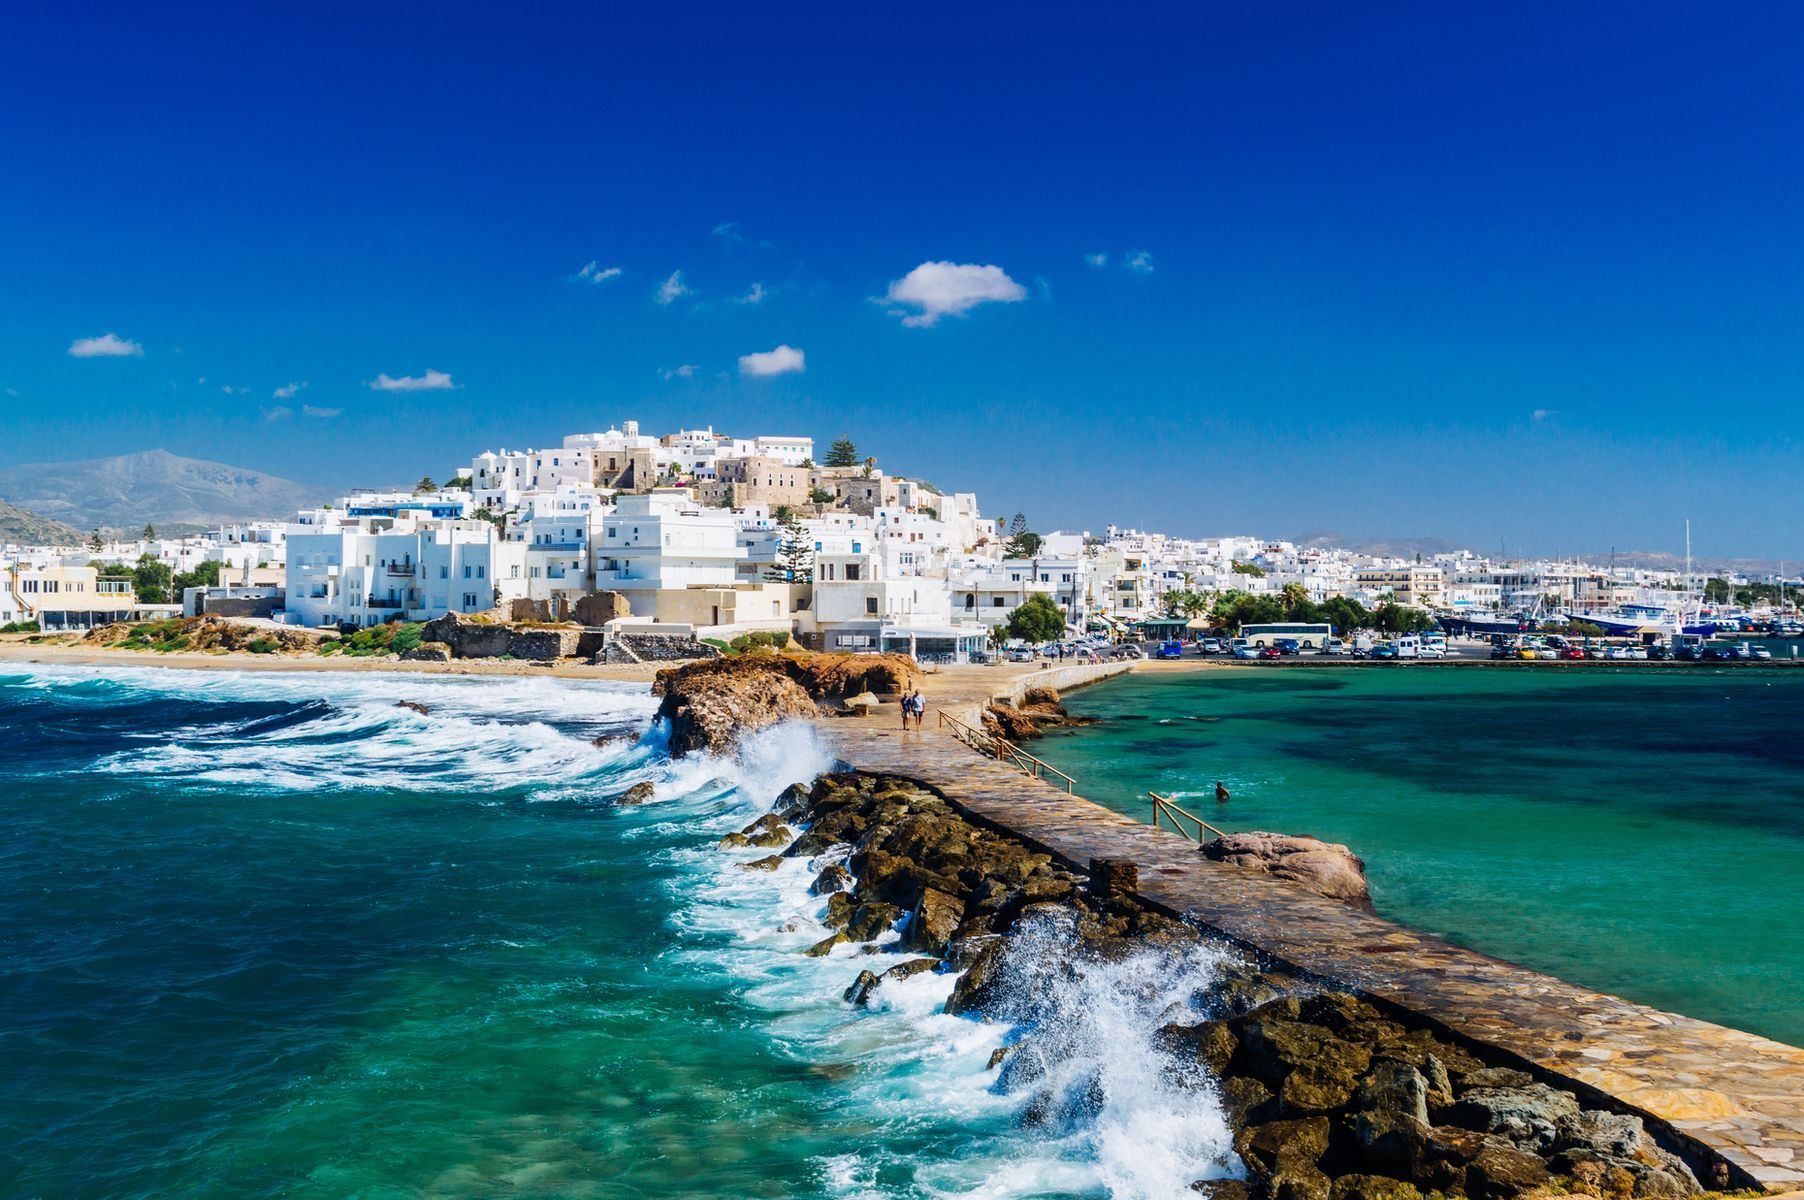 Largest of the <a href="https://www.visitgreece.gr/islands/cyclades/" rel="noreferrer noopener">Cyclades Islands</a>, <a href="https://www.discovergreece.com/cyclades/naxos" rel="noreferrer noopener">Naxos</a> is well known for its emblematic <a href="https://www.naxos.gr/the-temple-of-apollo-portara/?lang=en" rel="noreferrer noopener">Apollo Gate</a> and <a href="https://www.greeka.com/cyclades/naxos/sightseeing/naxos-temple-demeter/" rel="noreferrer noopener">Temple of Demeter</a>. Visitors can also unwind with a stroll through the bucolic streets of the medieval village of <a href="https://www.discovergreece.com/experiences/walking-tour-naxos-hora-complete-island-town" rel="noreferrer noopener">Hora</a> or along the golden sandy beaches of <a href="https://www.naxos.gr/plaka-beach/?lang=en" rel="noreferrer noopener">Pla</a><a href="https://www.naxos.gr/plaka-beach/?lang=en" rel="noreferrer noopener">k</a><a href="https://www.naxos.gr/plaka-beach/?lang=en" rel="noreferrer noopener">a</a> and <a href="https://www.naxos.net/beaches/agios-prokopios/" rel="noreferrer noopener">Agios Prokopios</a>. More active travellers may opt for a hike to the summit of <a href="http://www.cyclades.mobi/hilite-00000000000132-en.html" rel="noreferrer noopener">Mount Zas</a>, the Cyclades’ highest peak and a great spot for exceptional panoramic views.